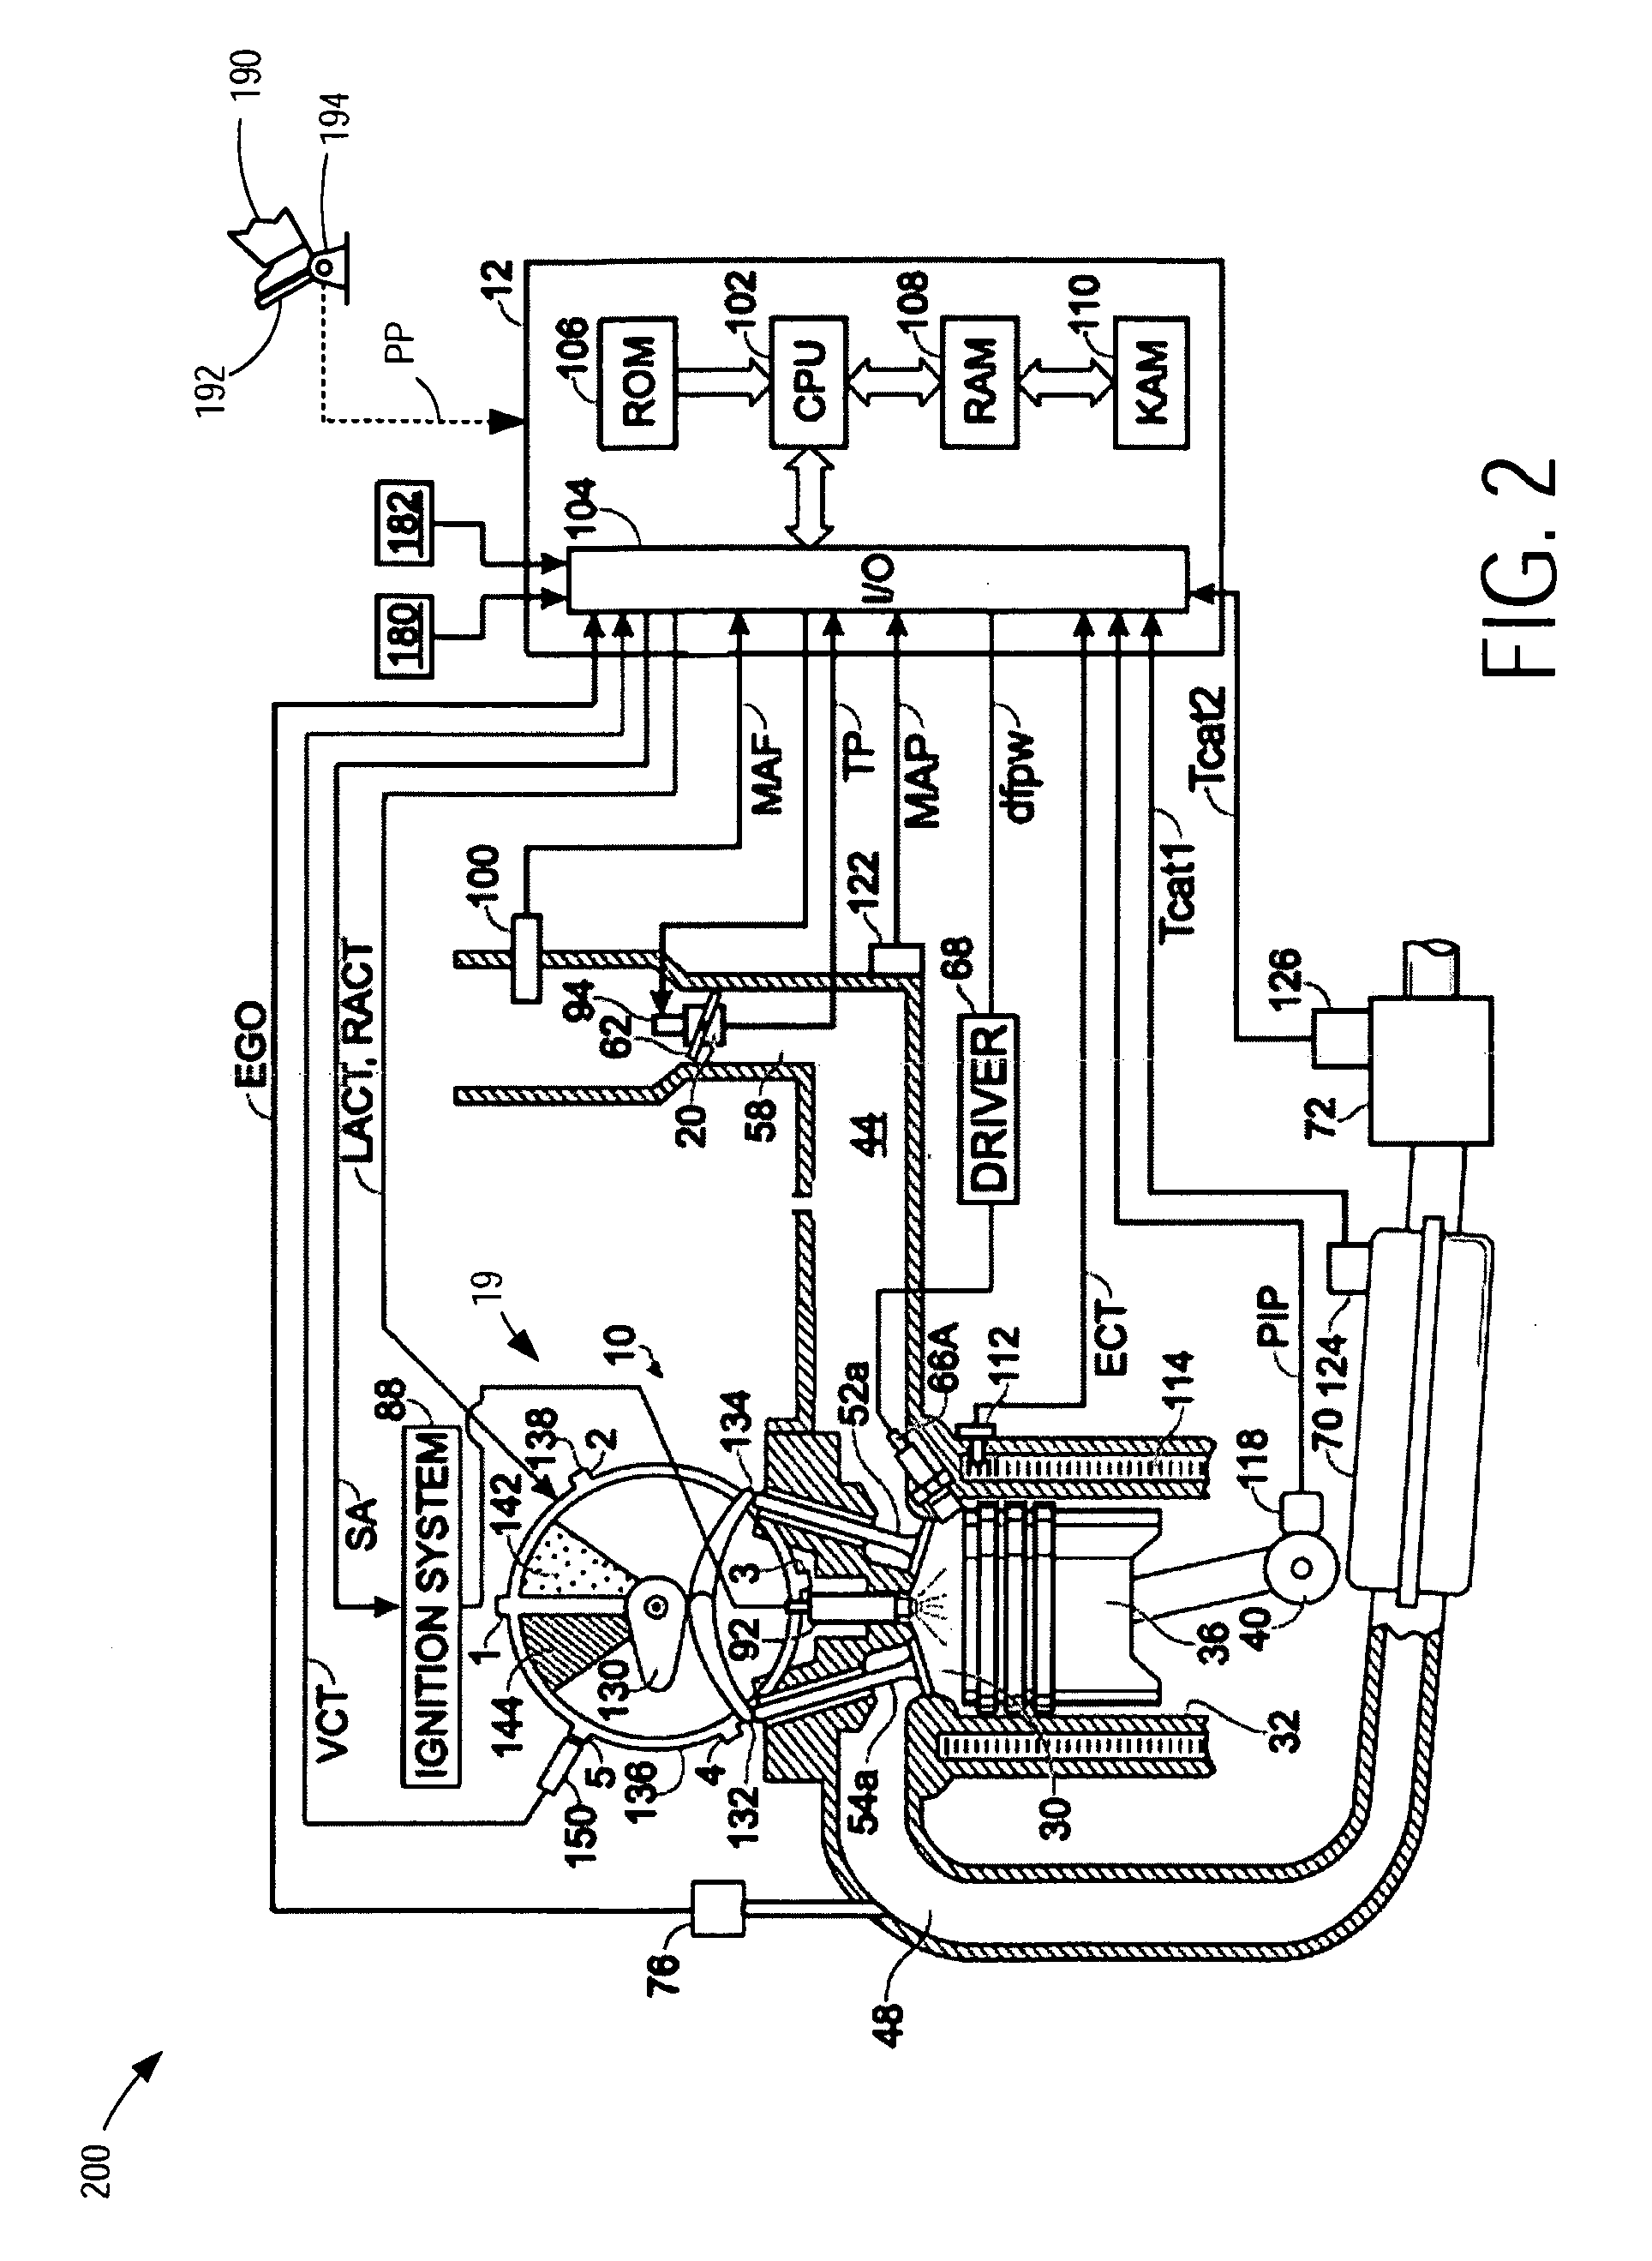 Coordination of variable cam timing and variable displacement engine systems